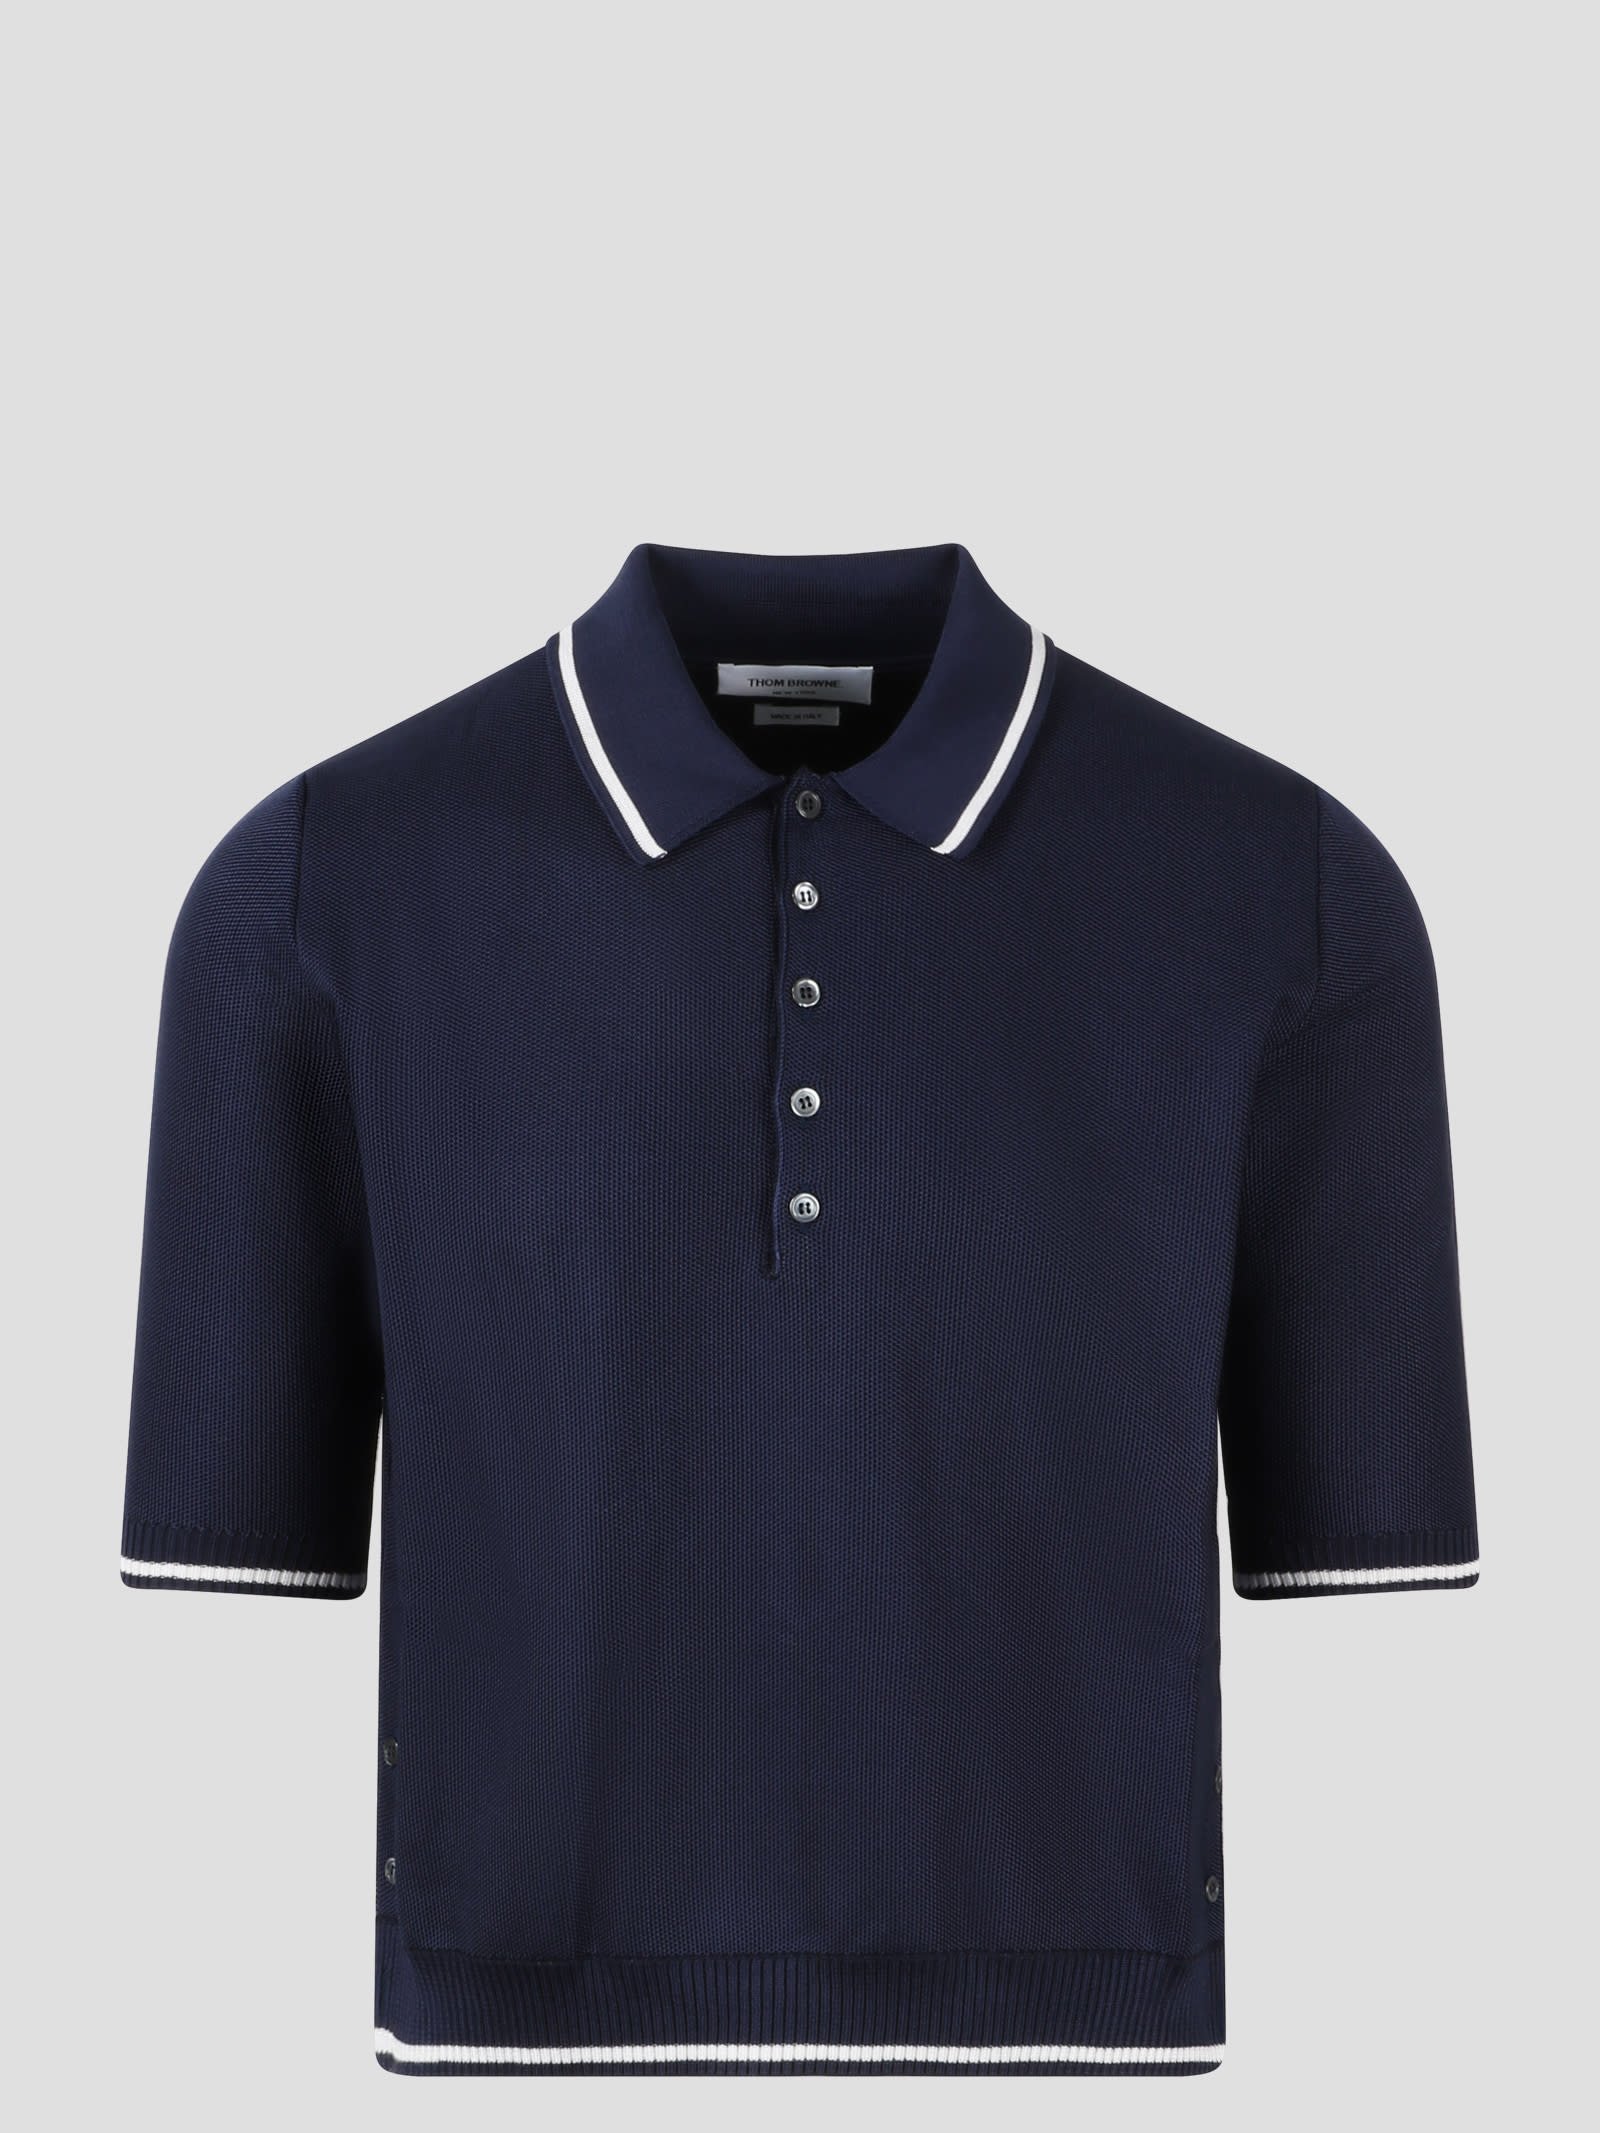 THOM BROWNE TIPPING PIQUE STITCH POLO SHIRT